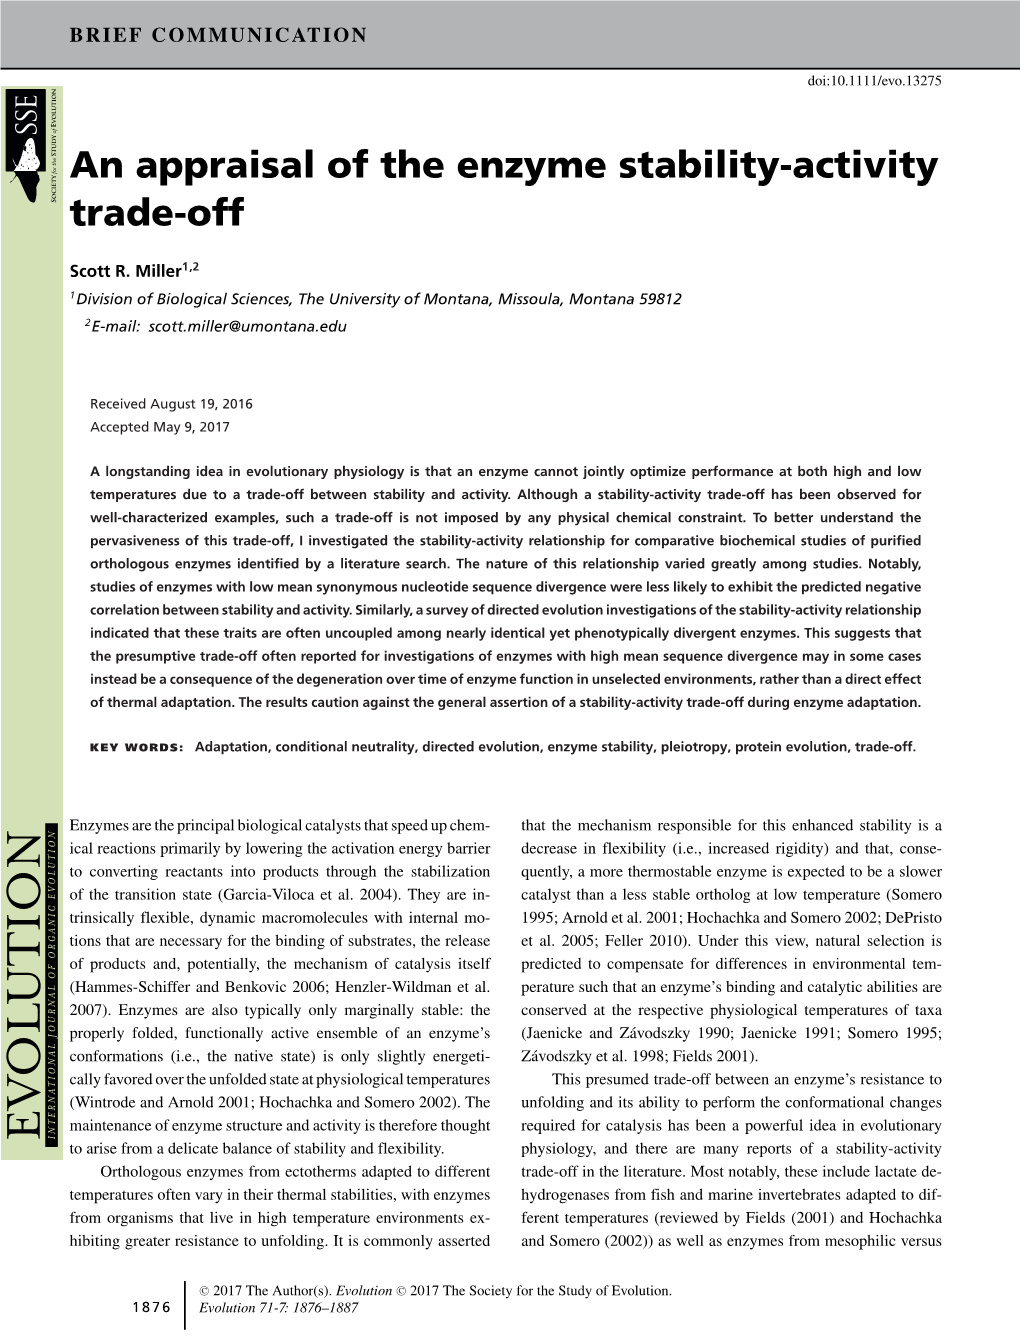 An Appraisal of the Enzyme Stability-Activity Trade-Off